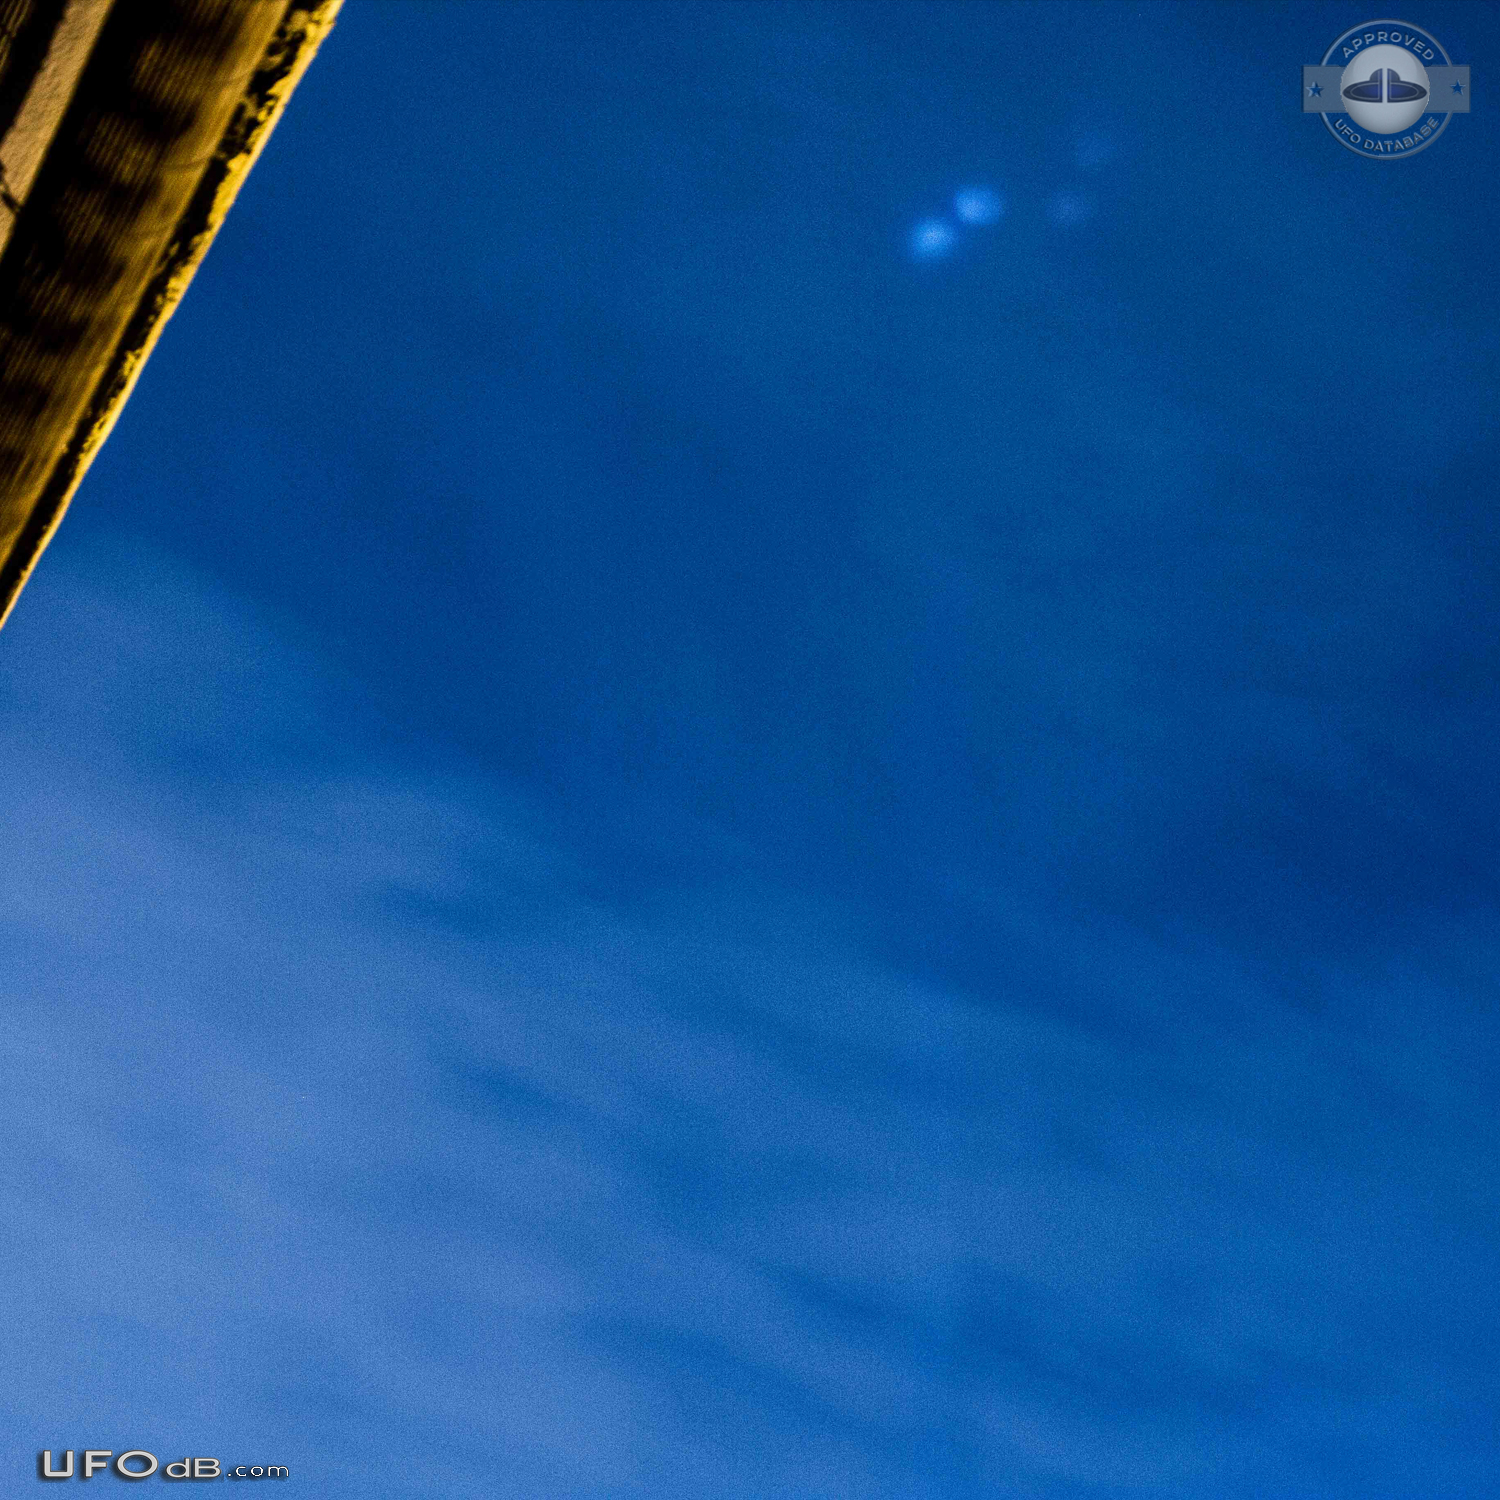 UFO light coming from inside clouds, circle shape. Blinking Pszczyna P UFO Picture #799-1